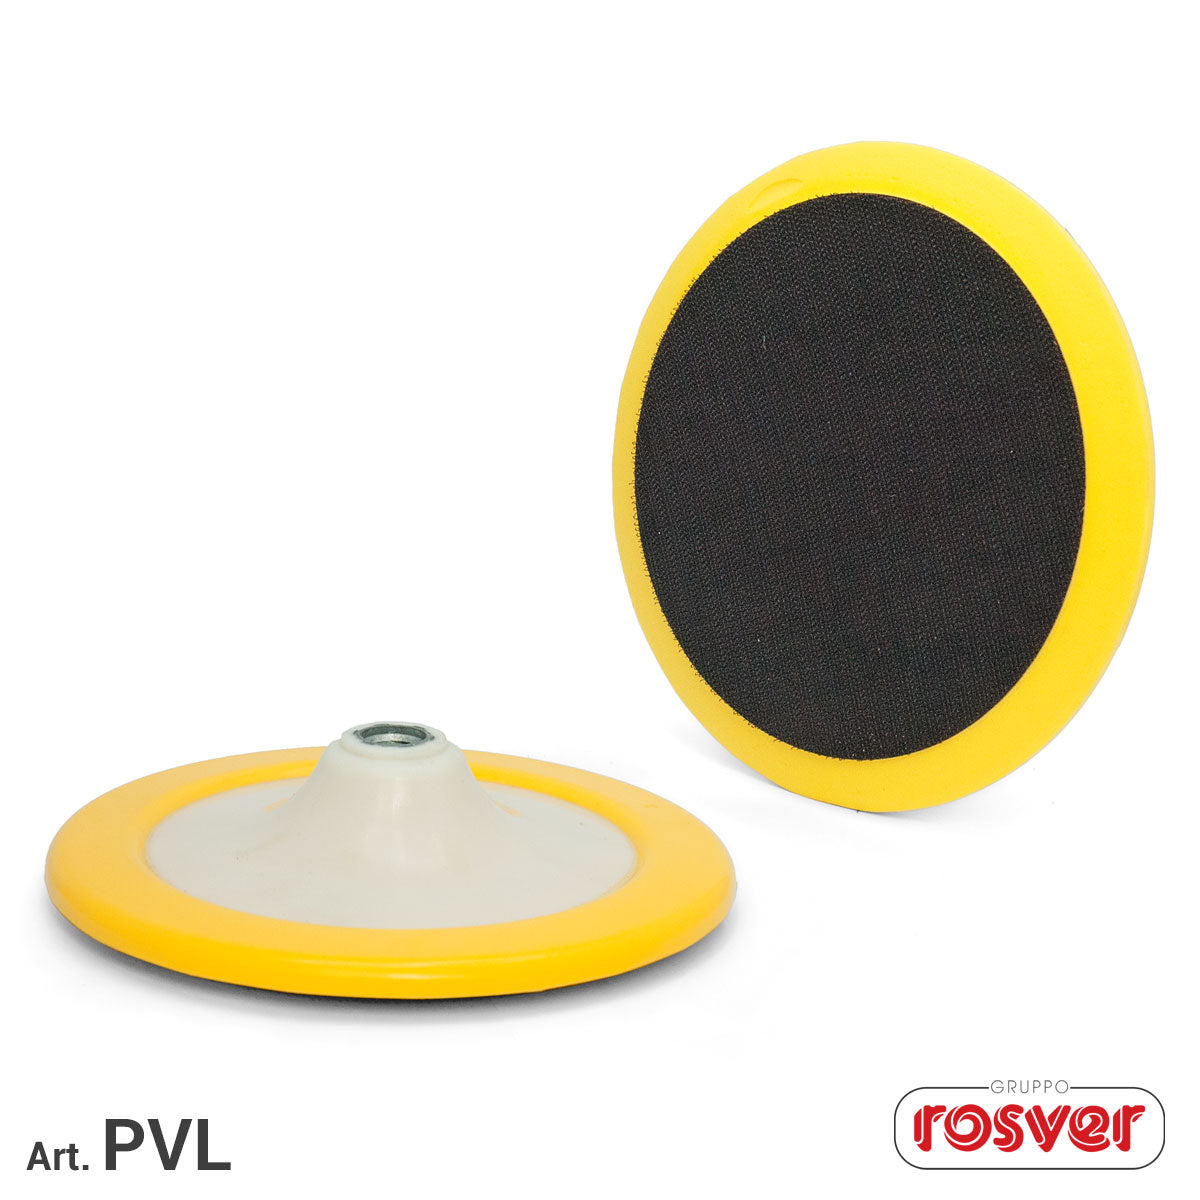 Pad for Twisted Wool Discs PVL 175 M14 Rosver - Conf.1pz